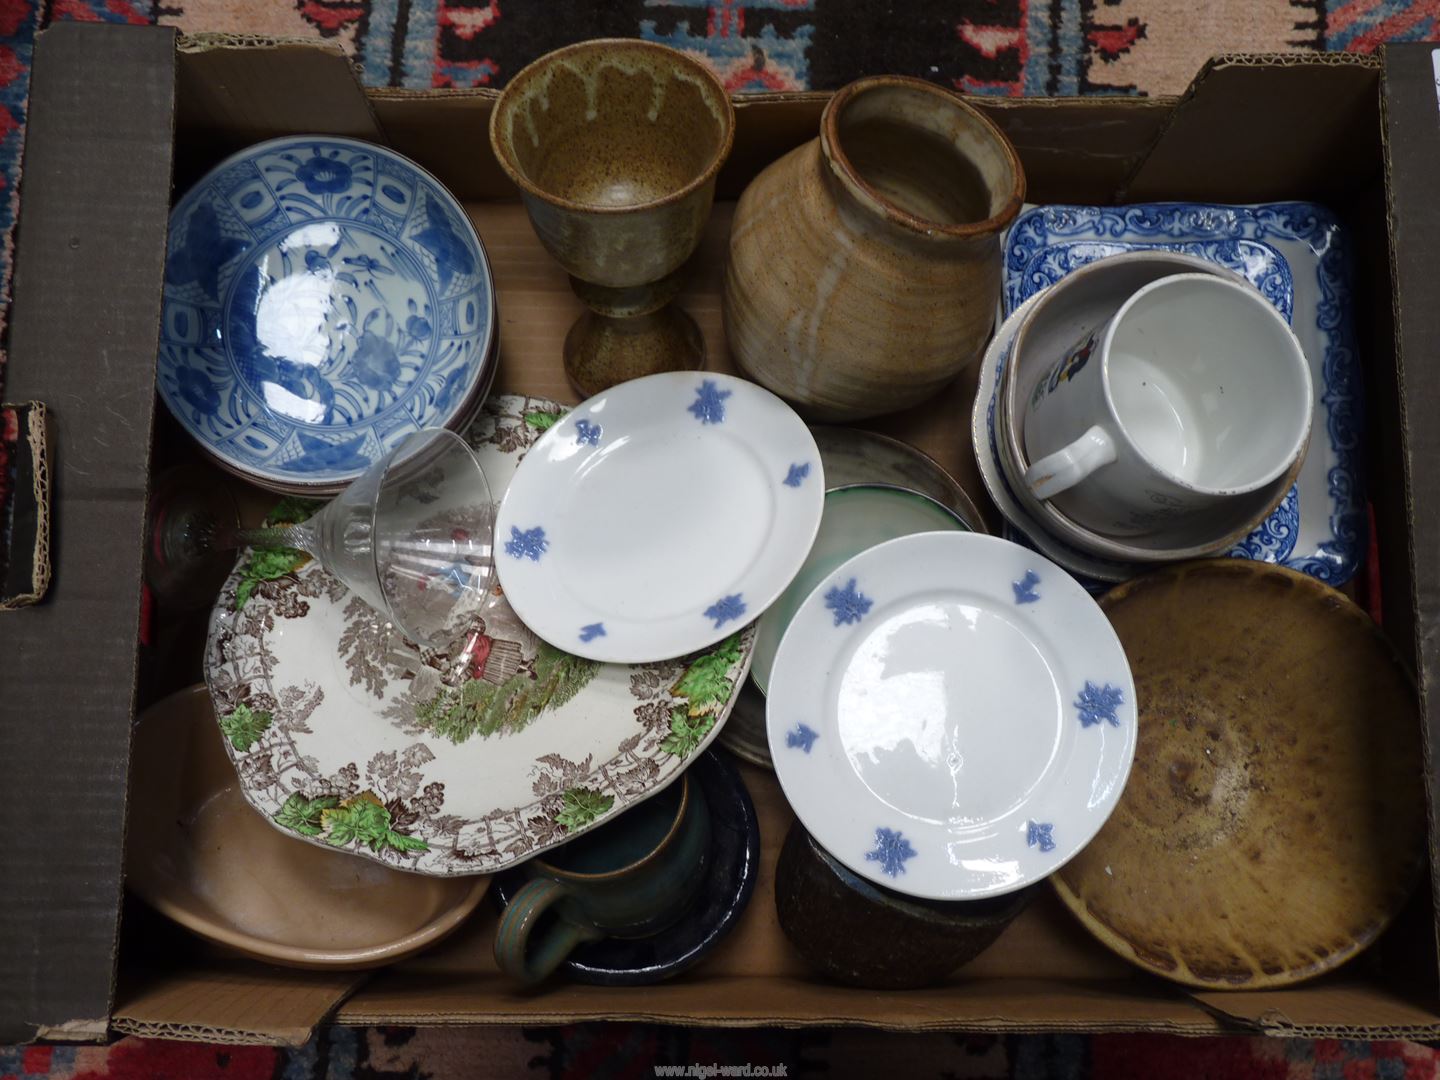 A quantity of china and pottery including; three 'Shredded Wheat' bowls, 'God Speed the Plough' mug,